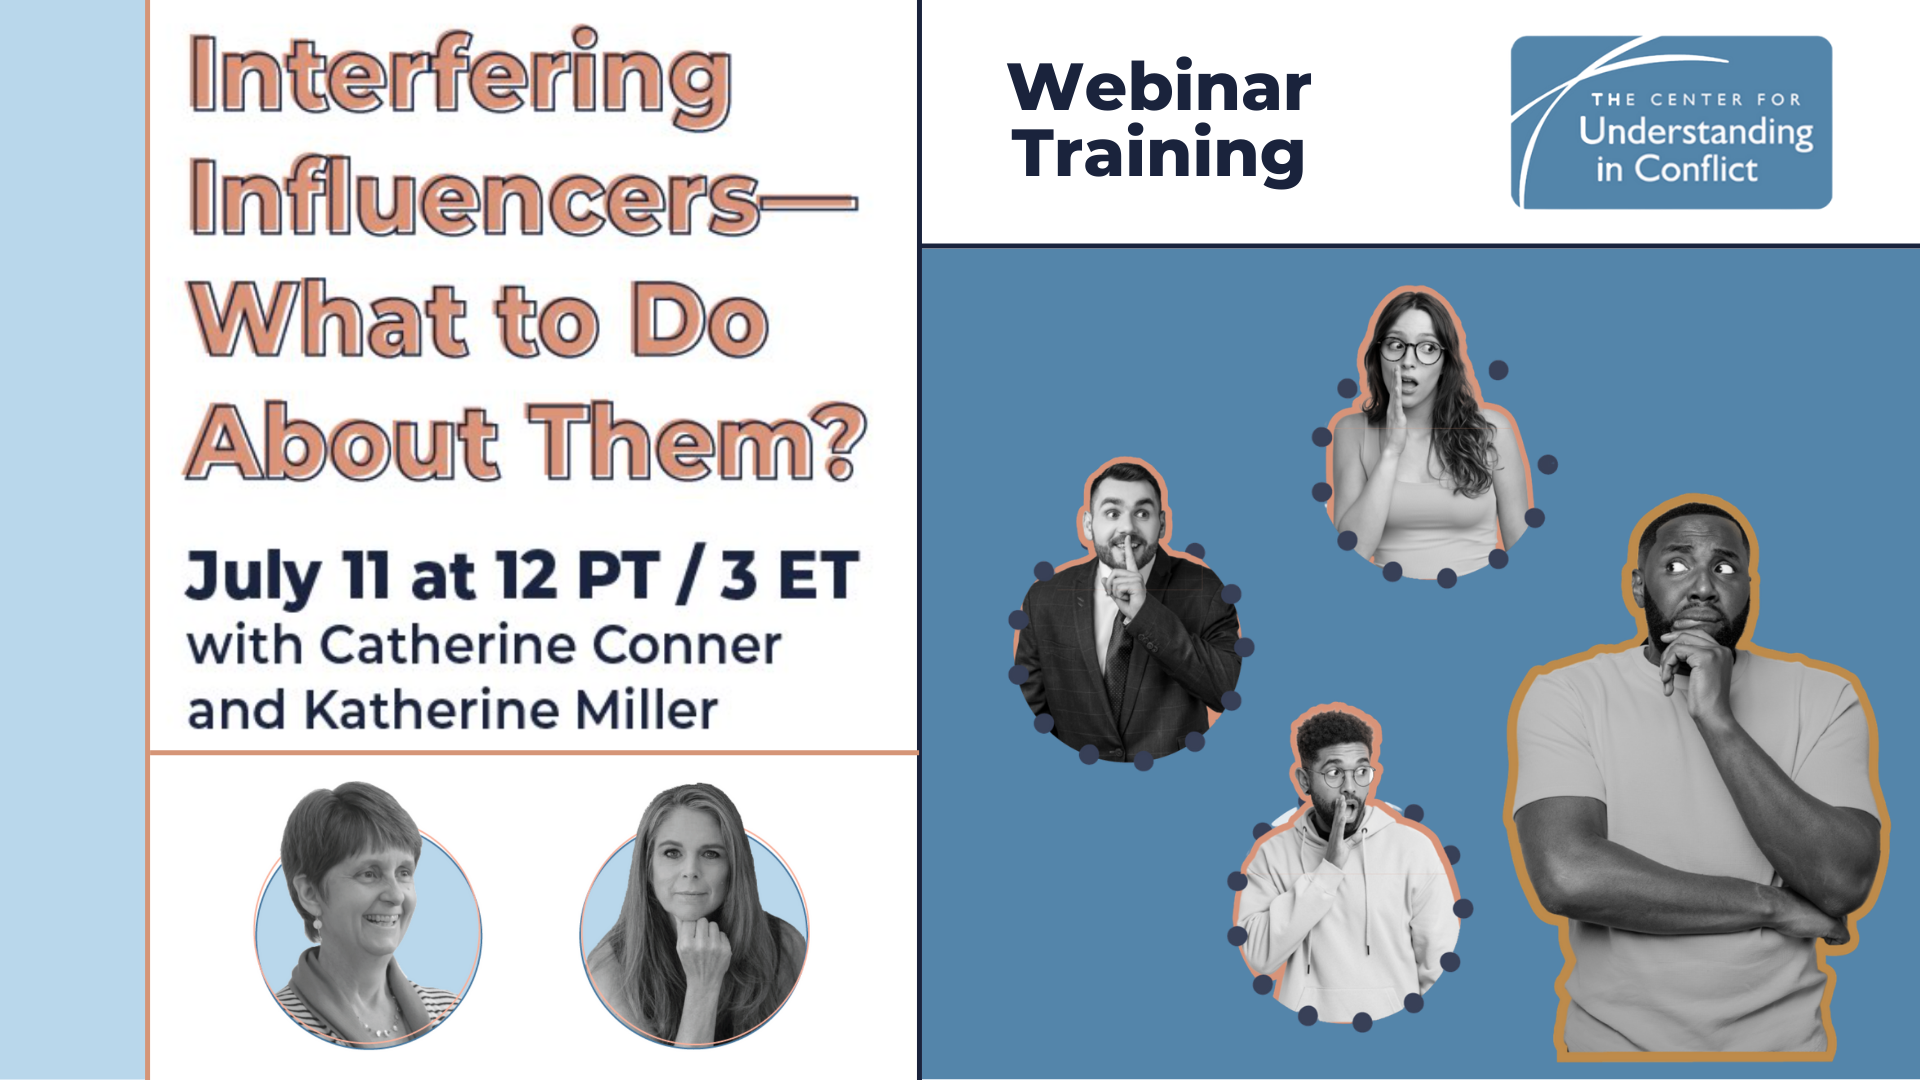 Interfering Influencers—What to Do About Them?